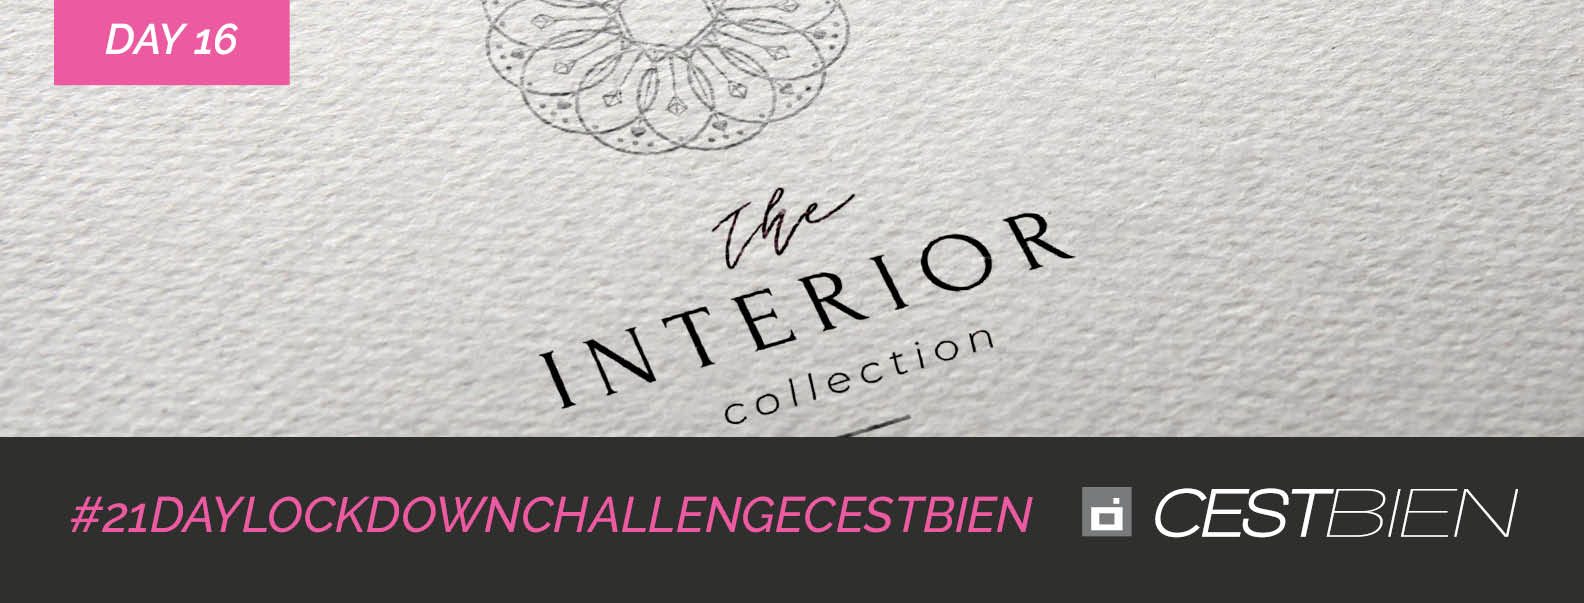 Lockdown Day16 – Client: The Interior Collection